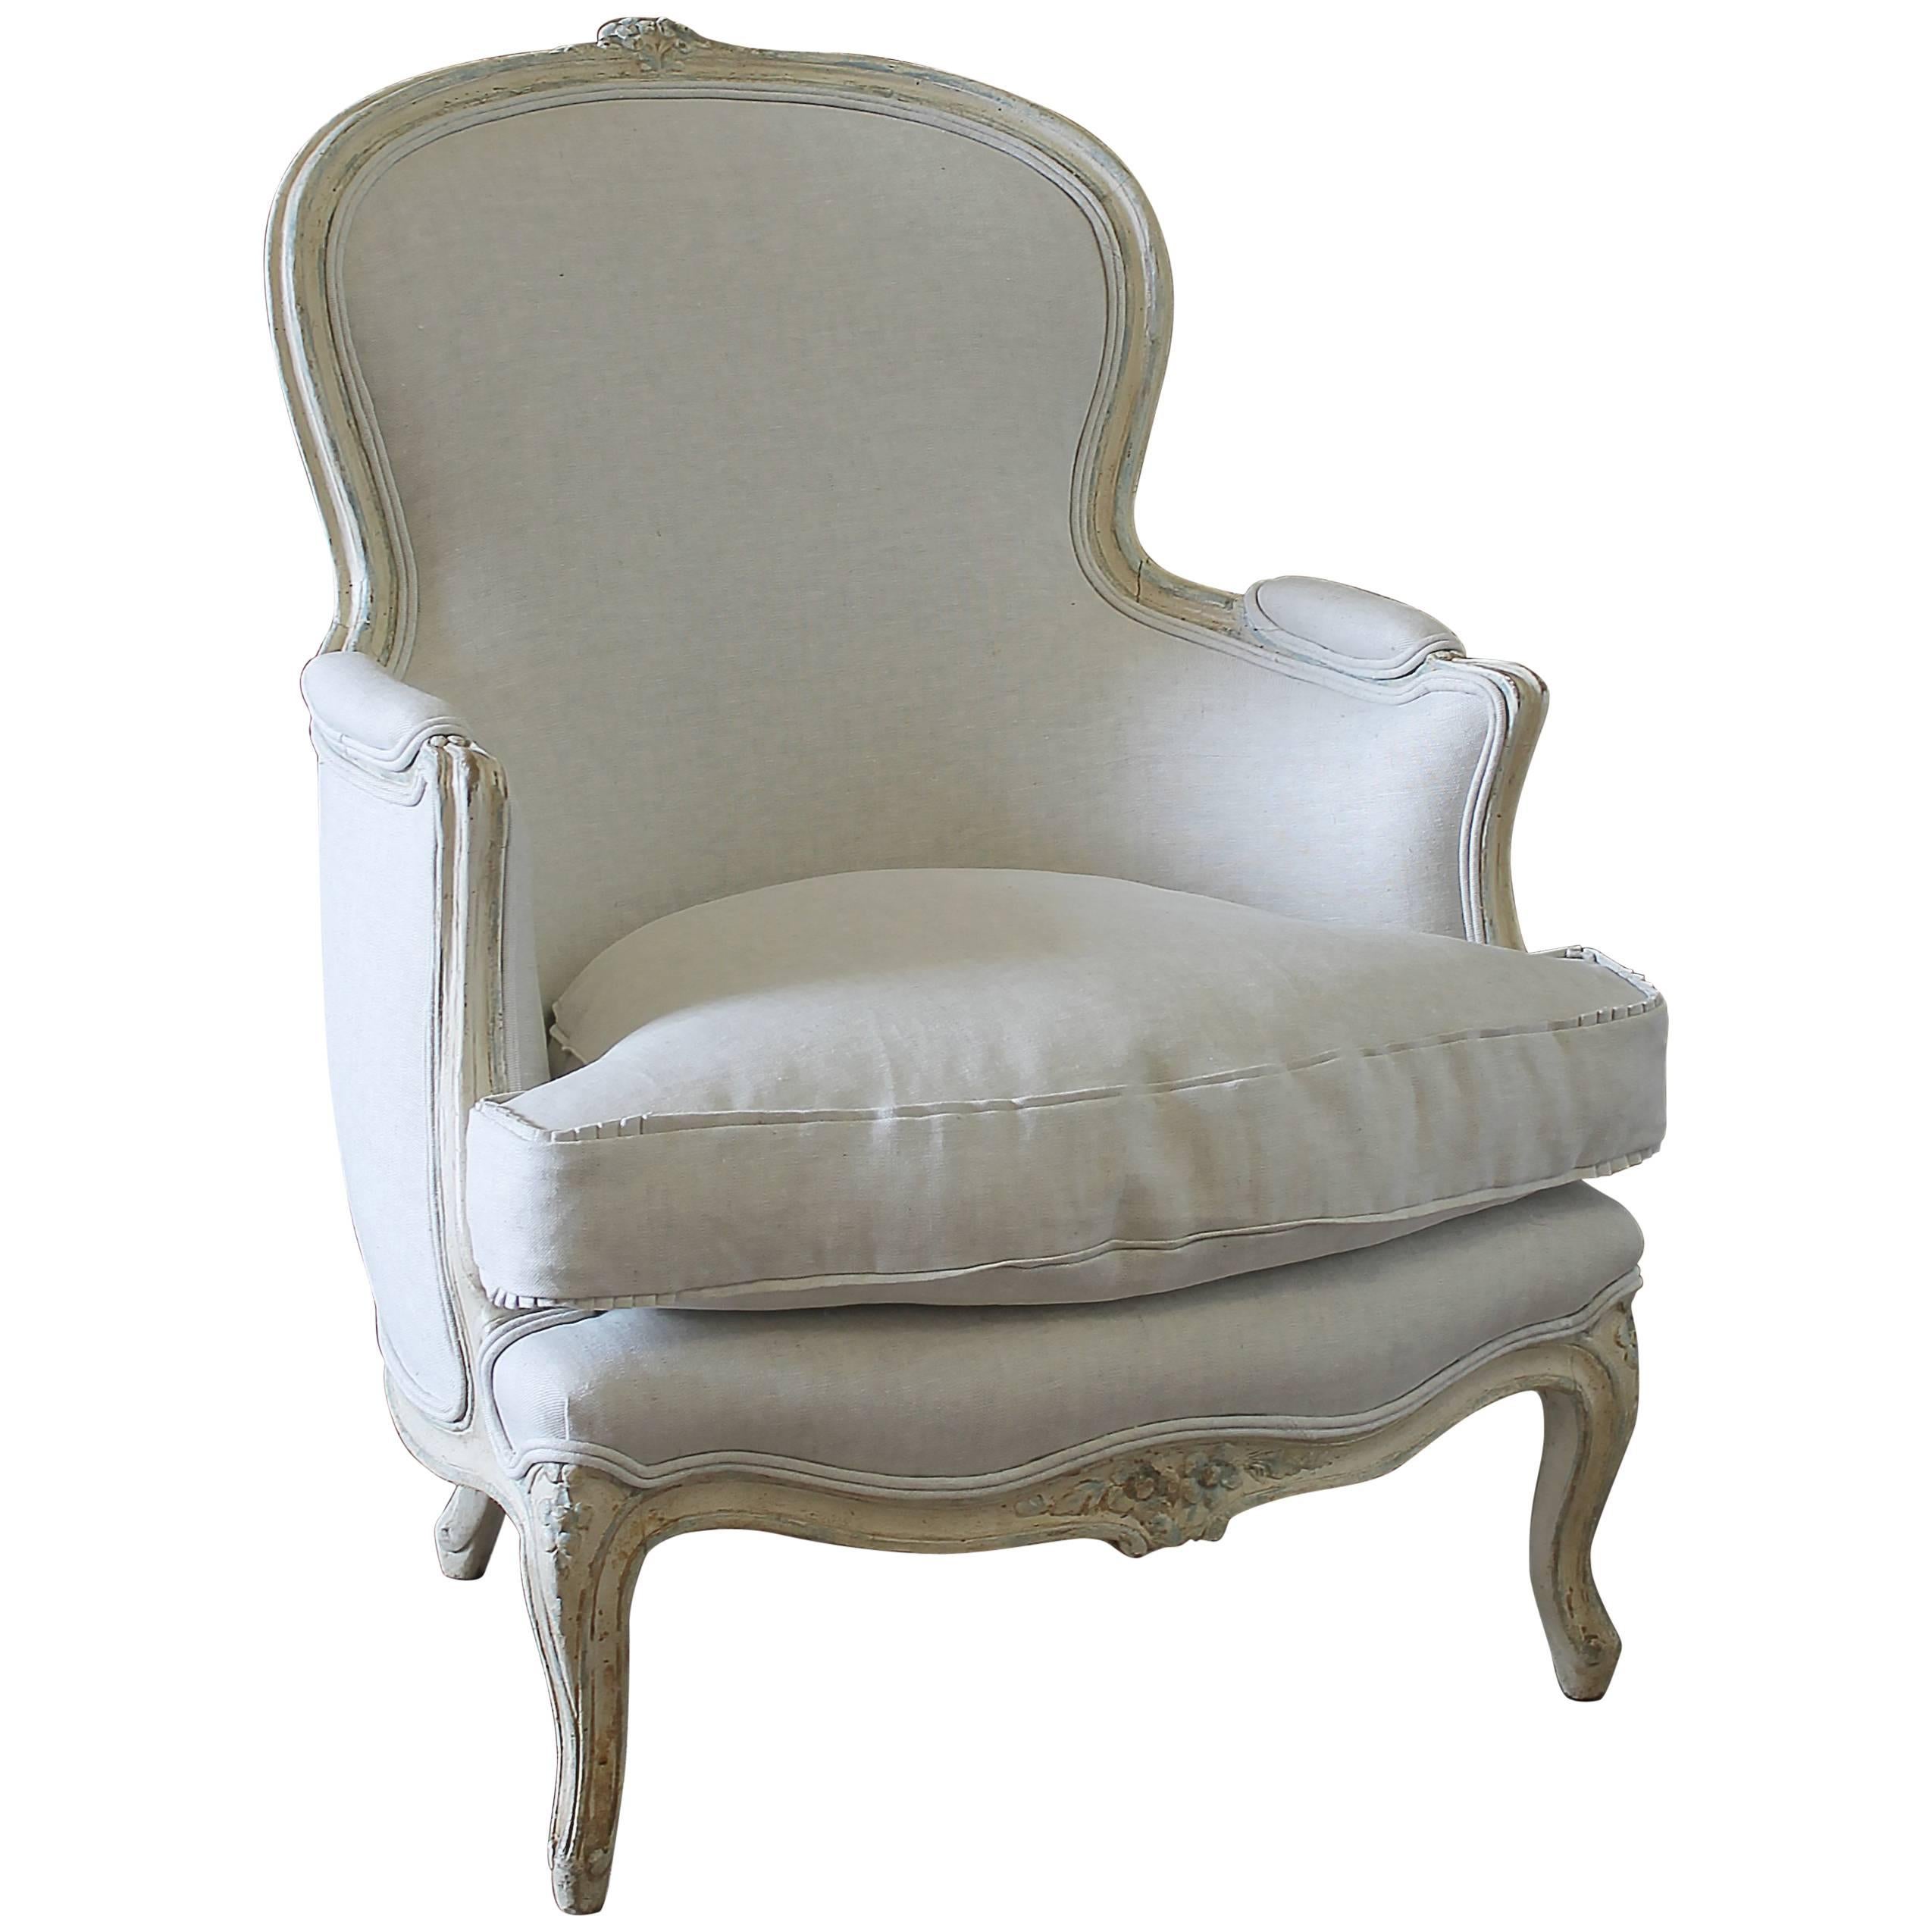 Early 20th Century Carved and Painted Bergere Chair Upholstered in Natural Linen